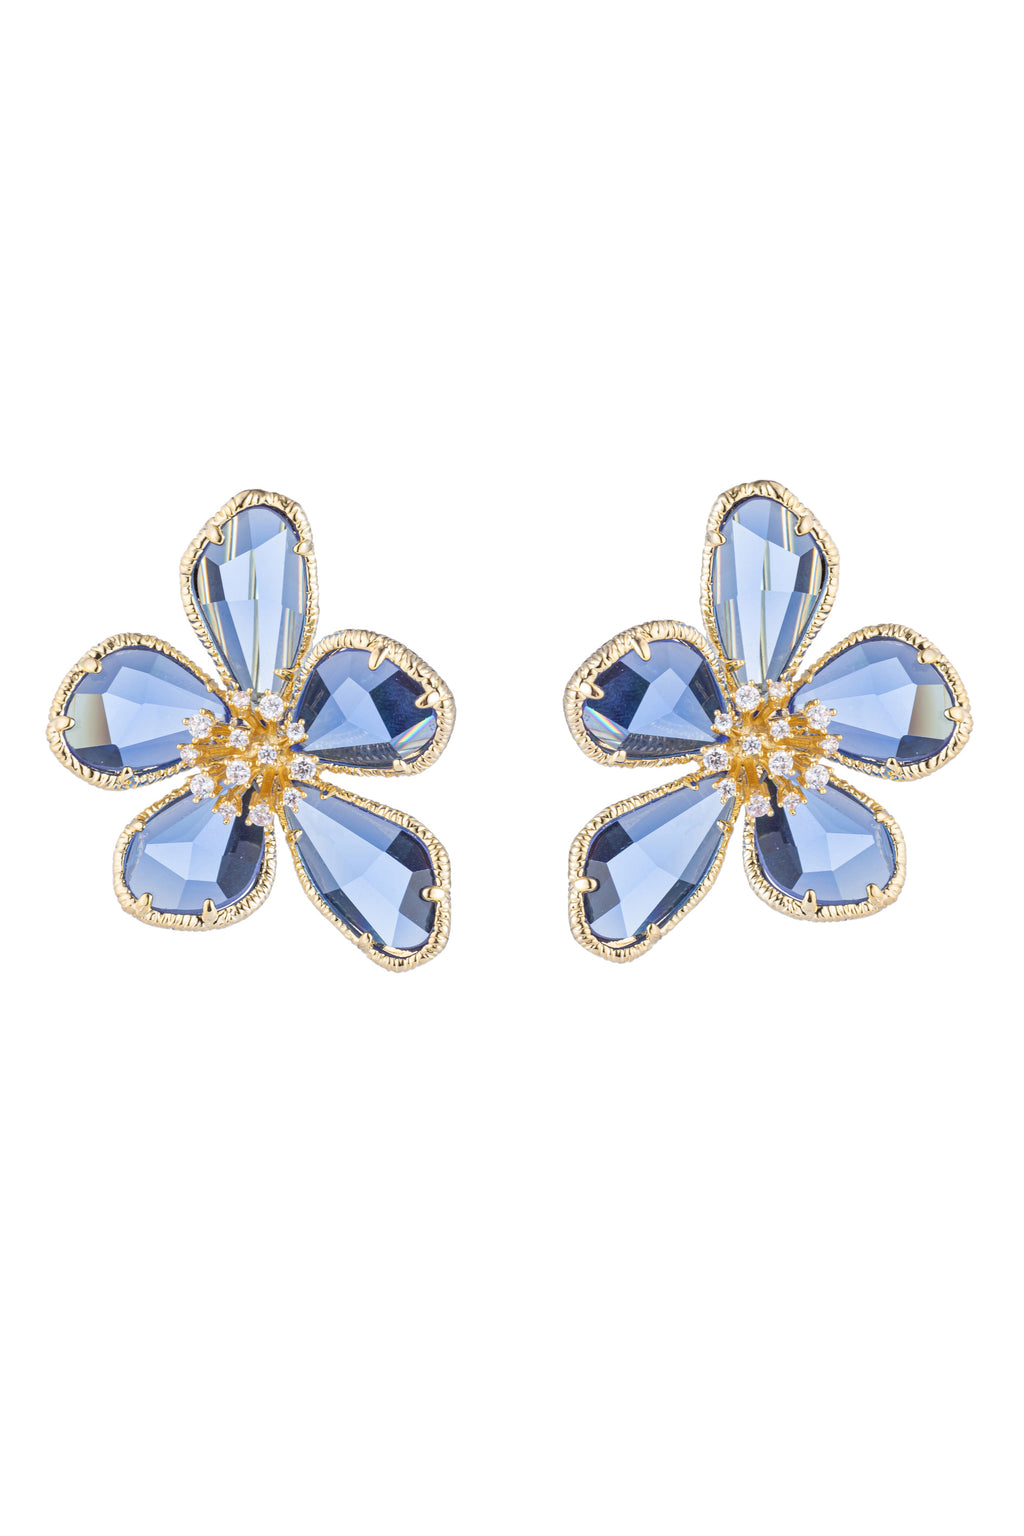 Blue flower earrings studded with CZ crystals.